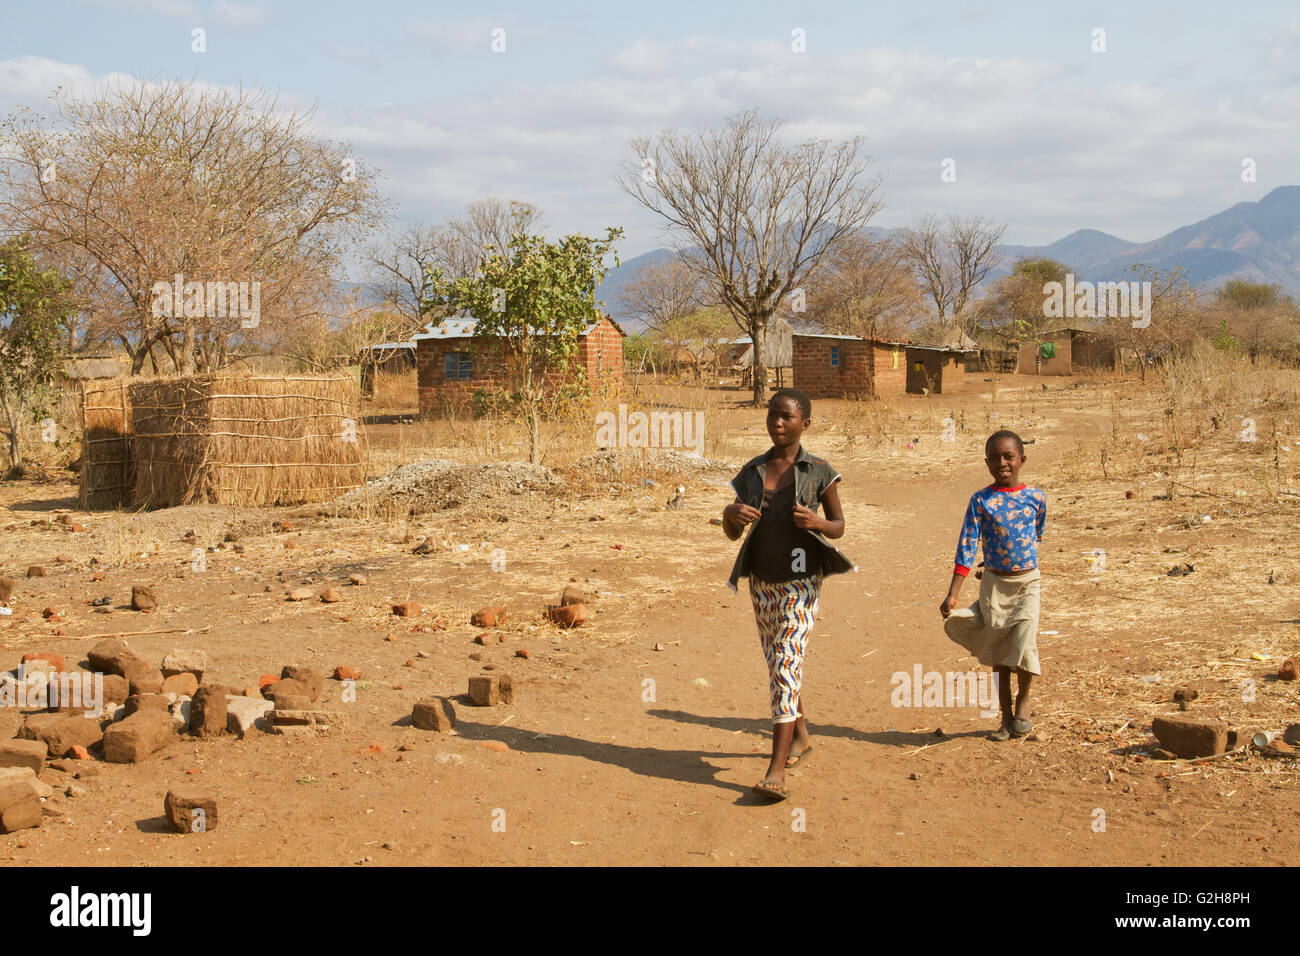 Girls walking by small brick homes in the Chiawa Cultural Village on the Zambezi River in Zambia, Africa Stock Photo